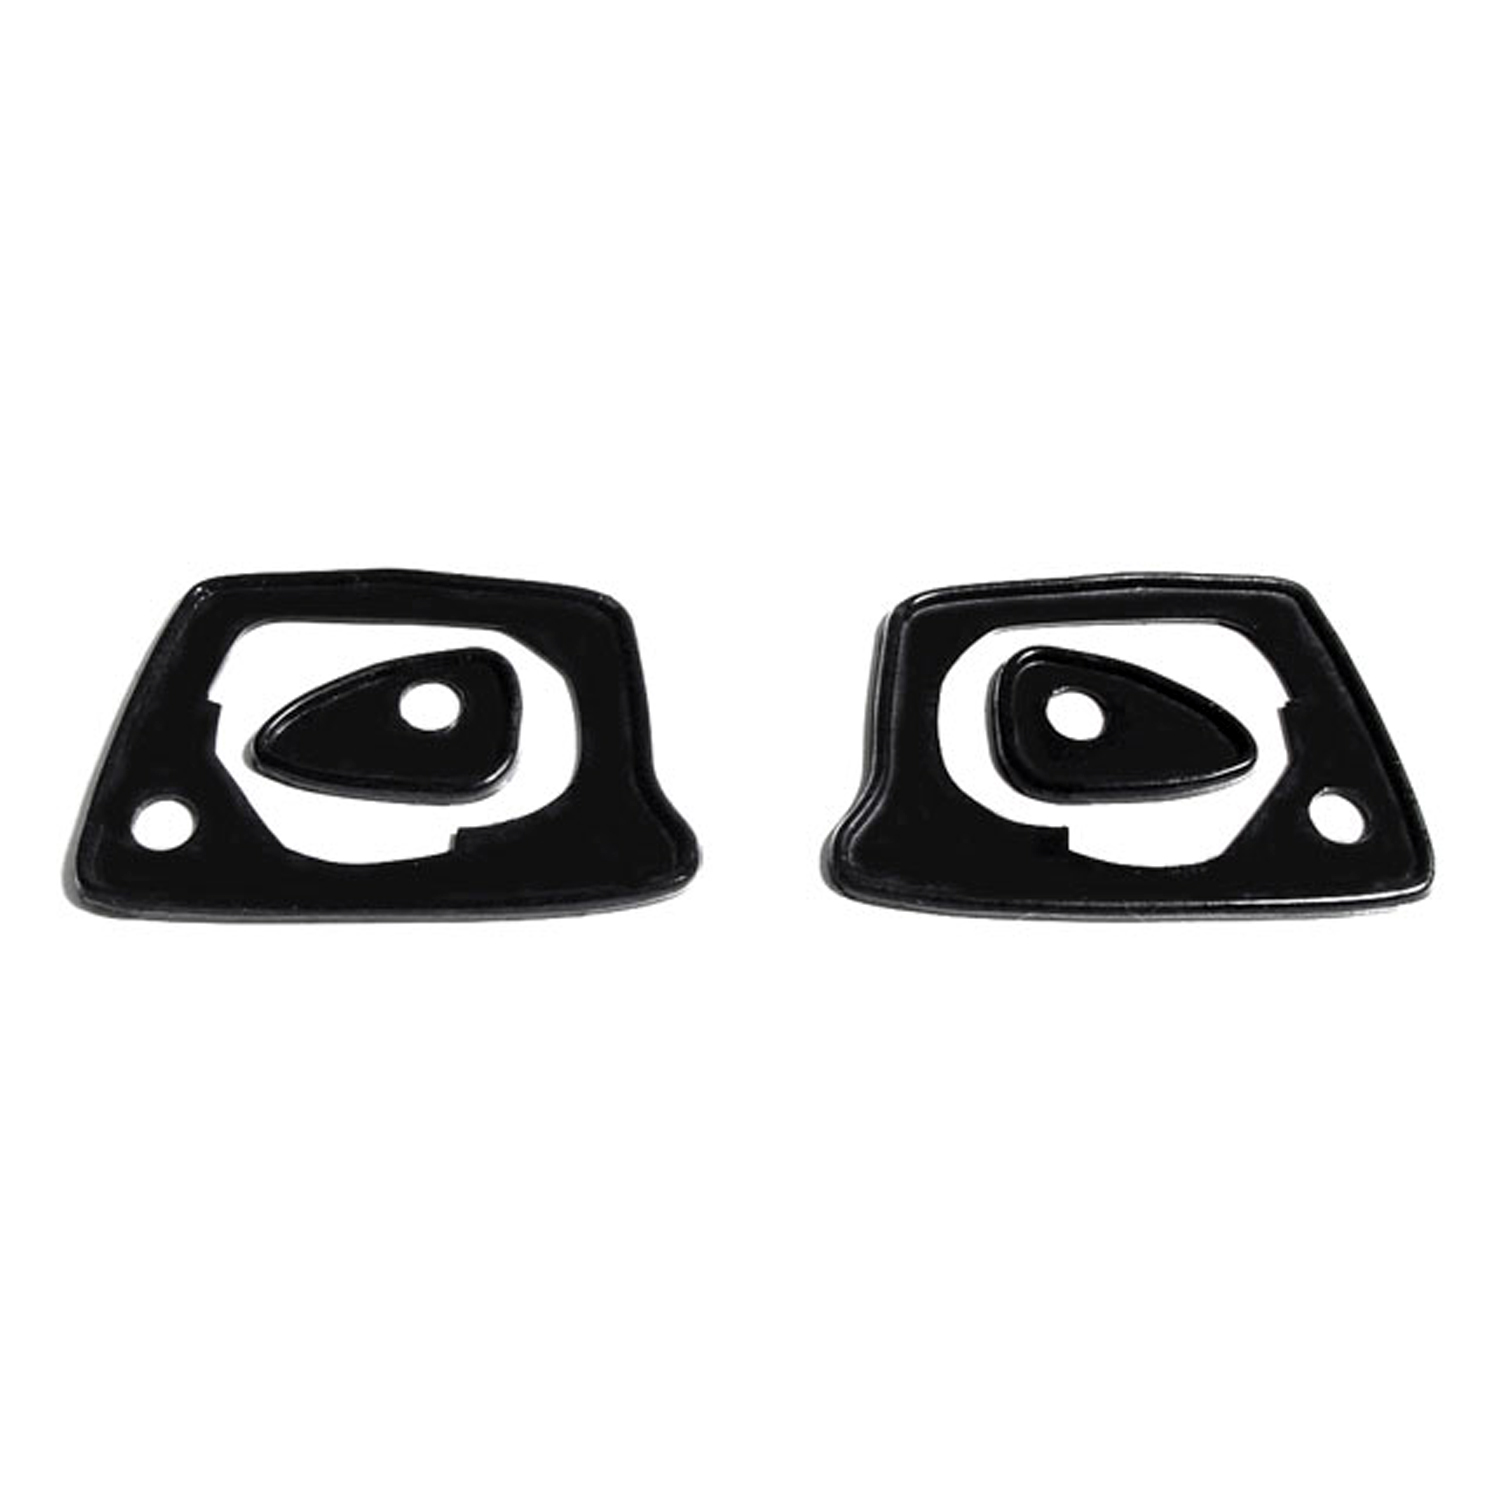 1971 Plymouth Fury III Door handle mounting pads.  2-3/8 in. L x 1-1/8 in. L-MP 959-B